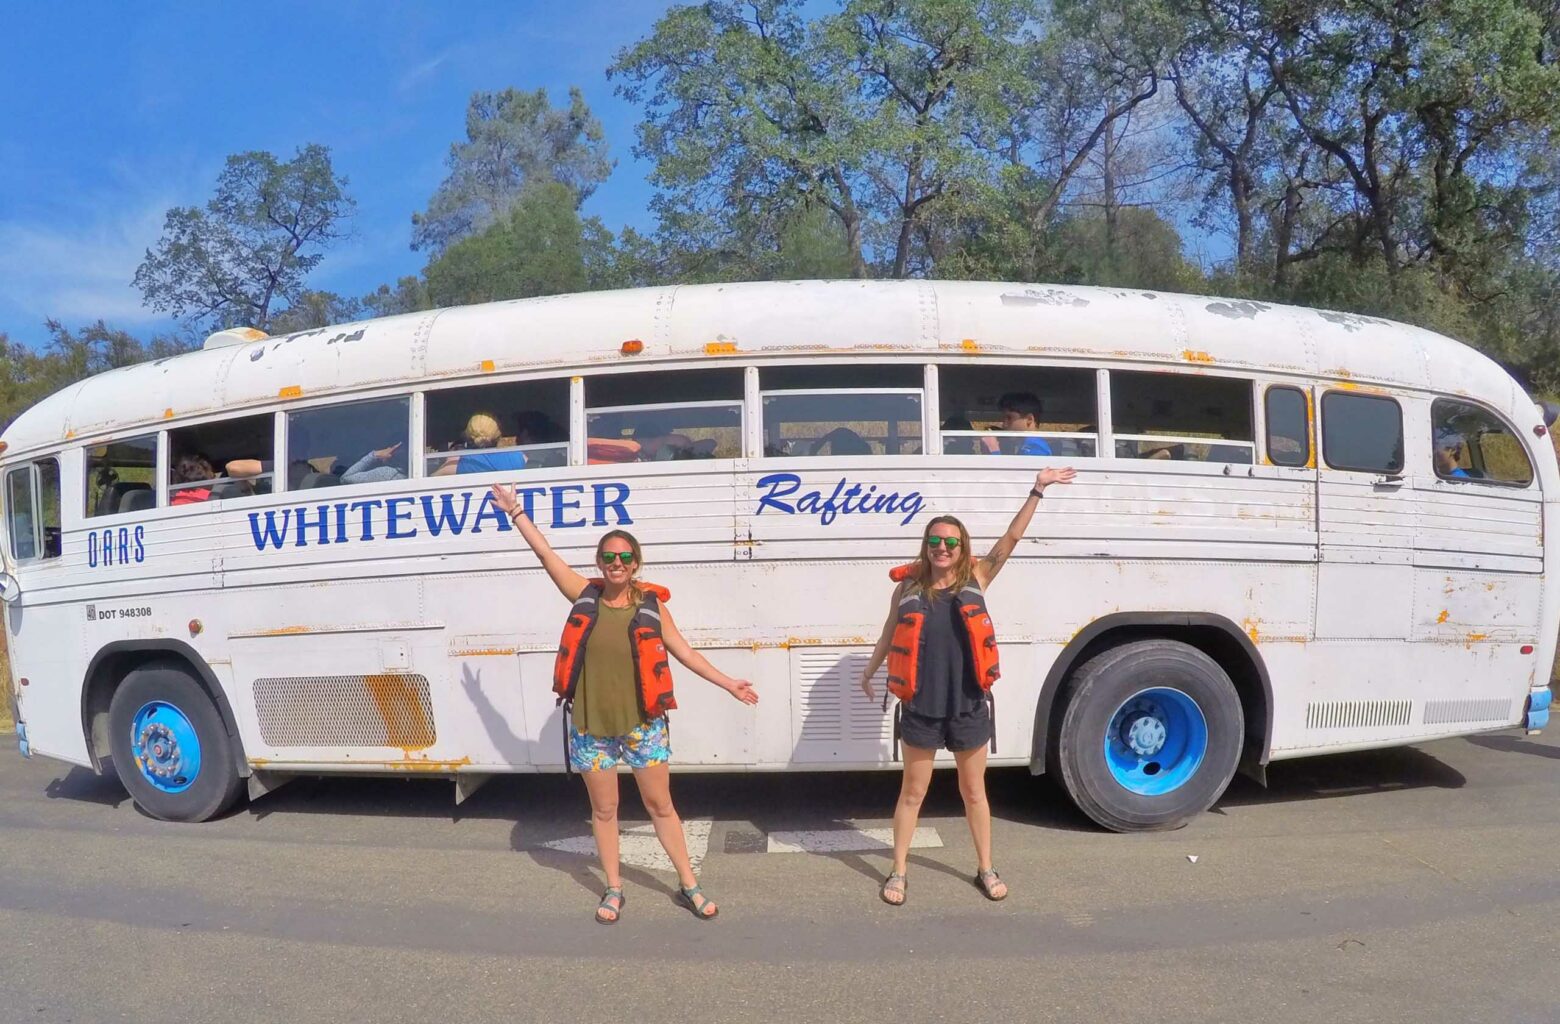 Two people posing in front the OARS Whitewater Rafting shuttle.